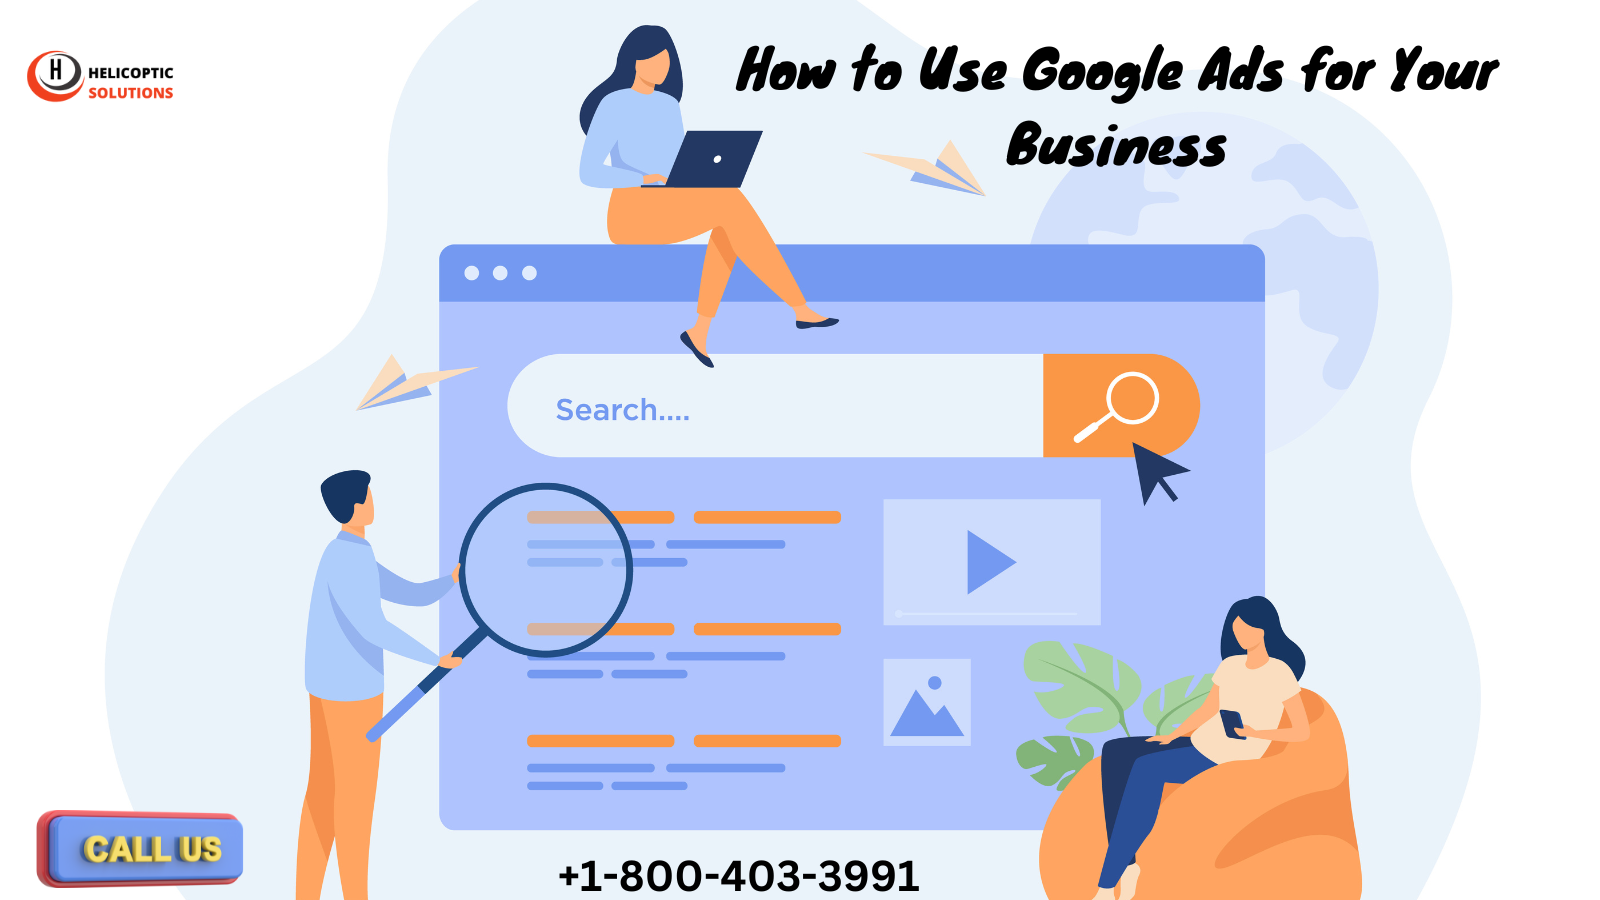 How to Use Google Ads for Your Business